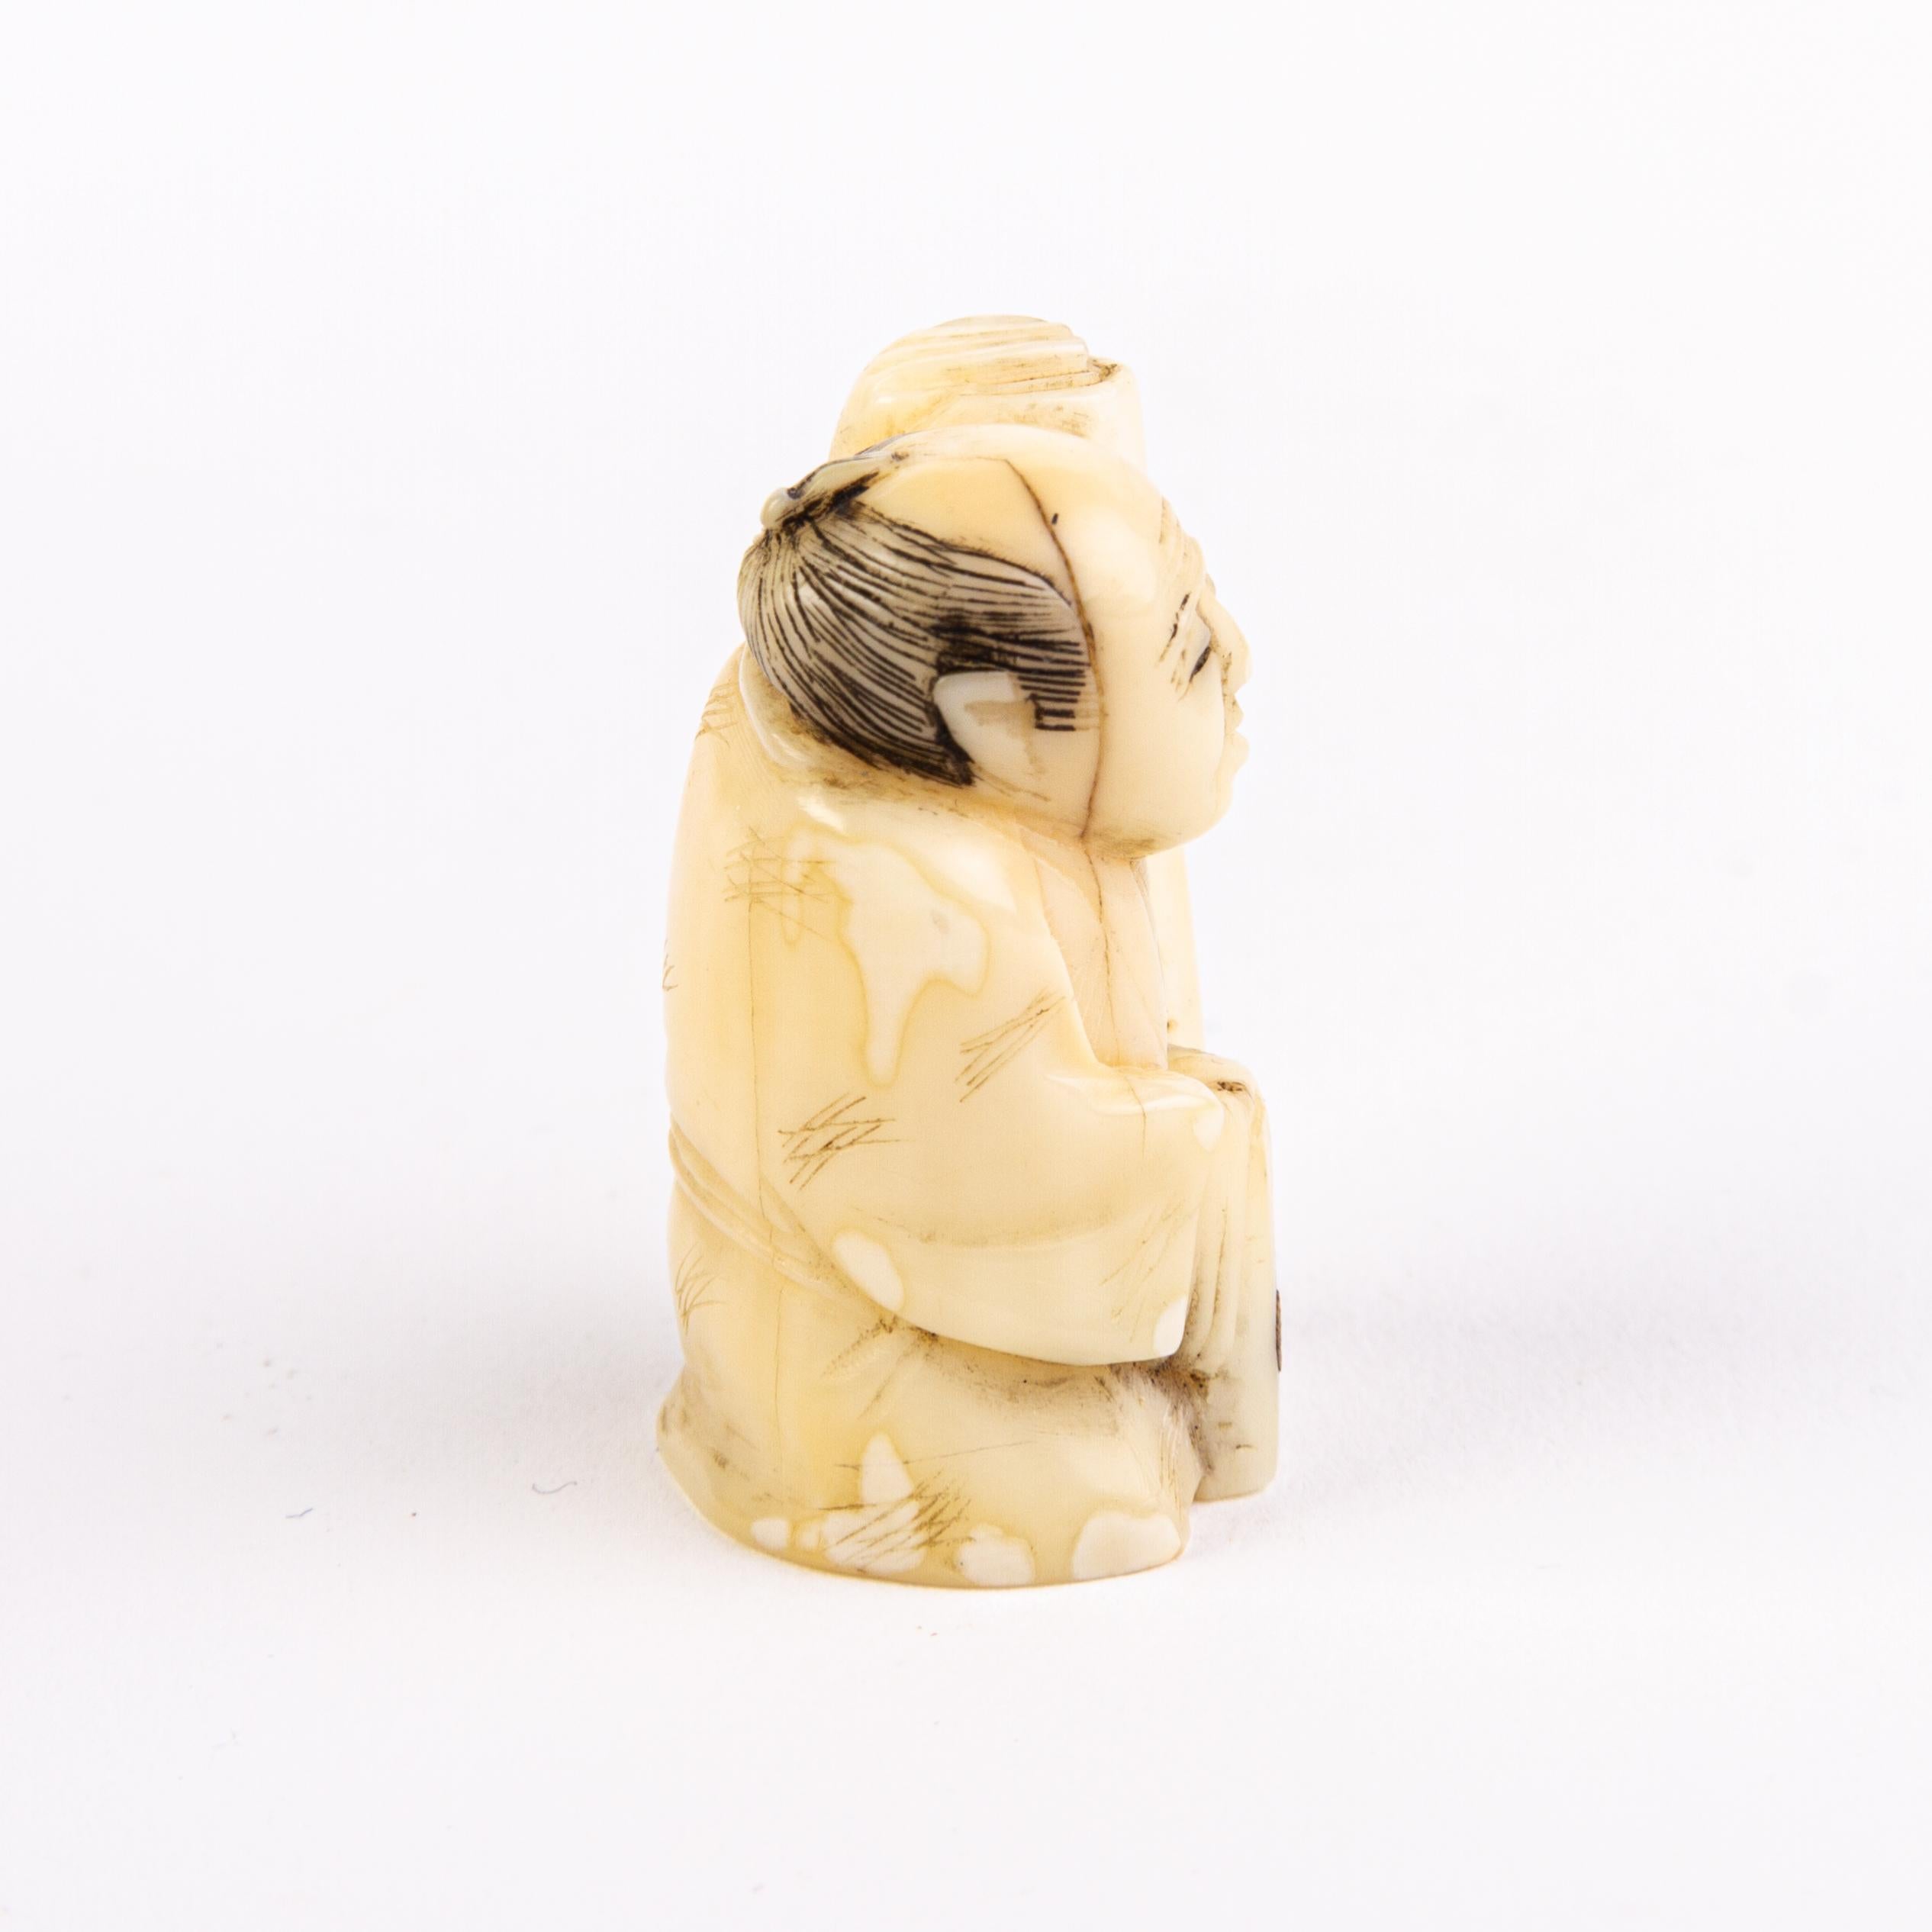 In good condition
From a private collection
Free international shipping
Japanese Meiji Netsuke Inro 